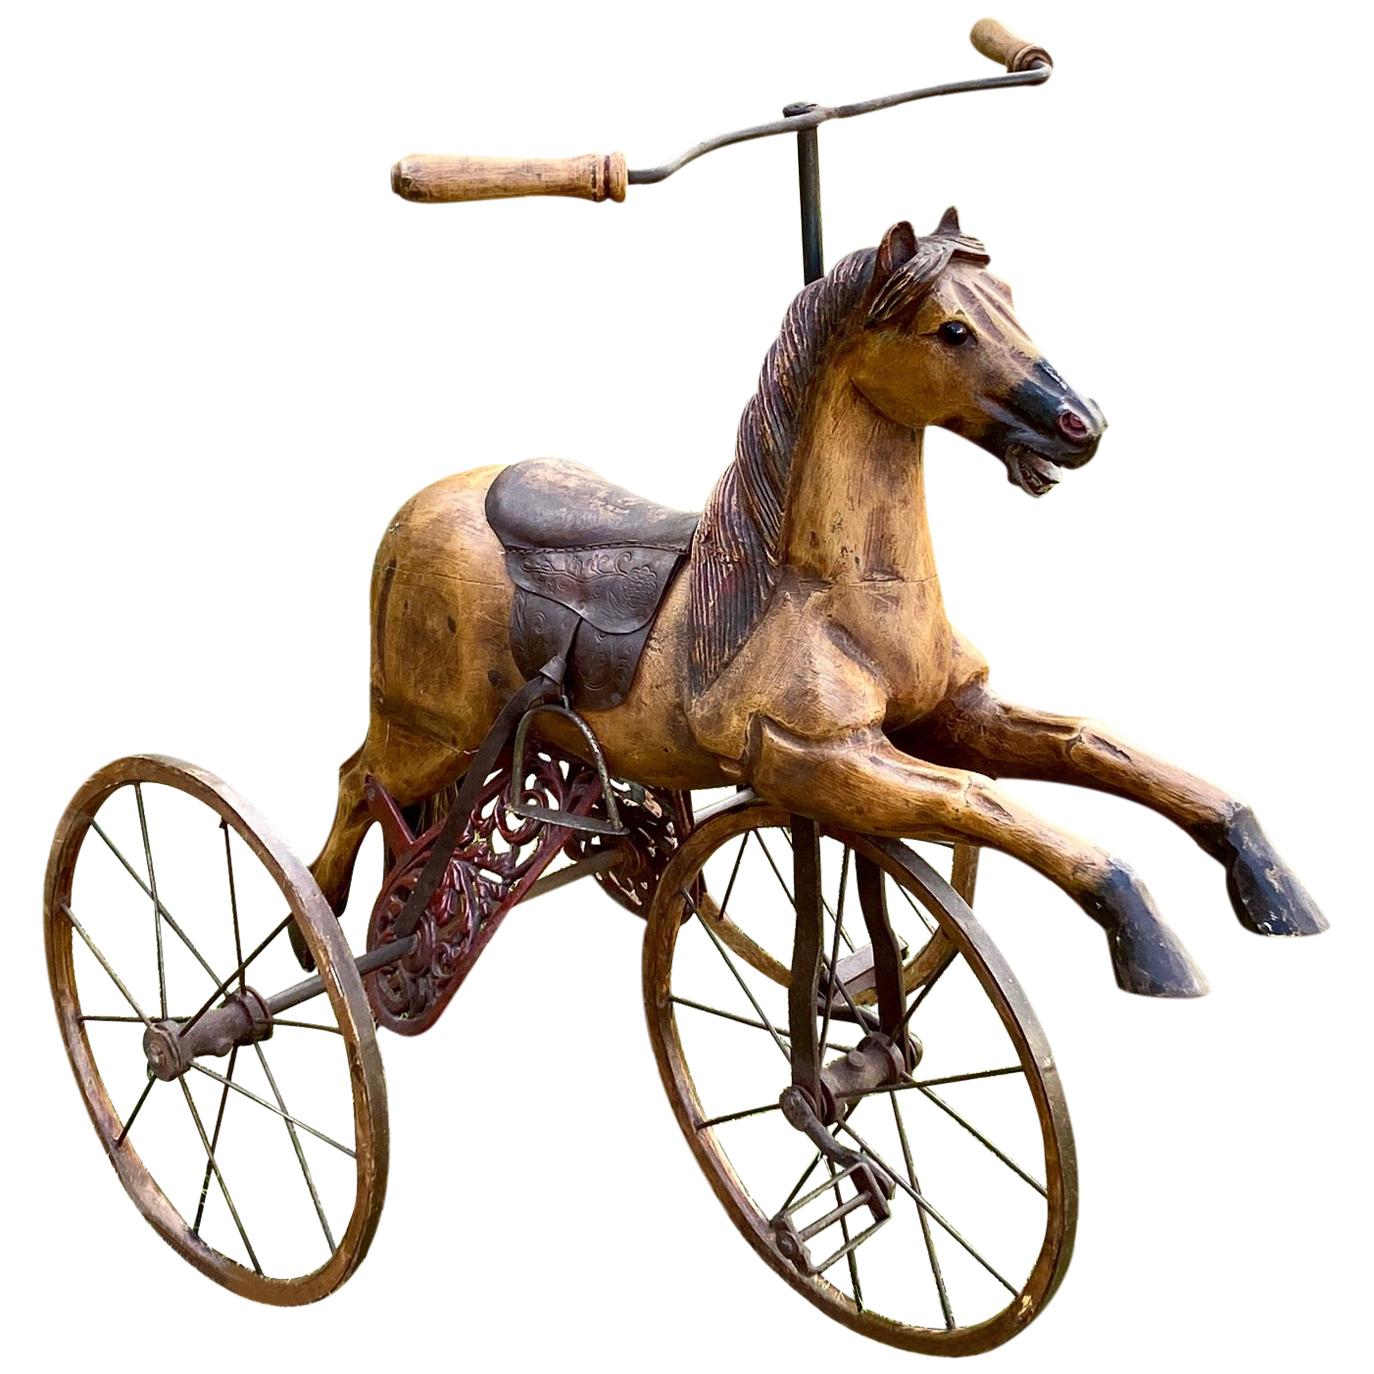 Charming Folk Art Child's Bicycle in the Shape of a Horse